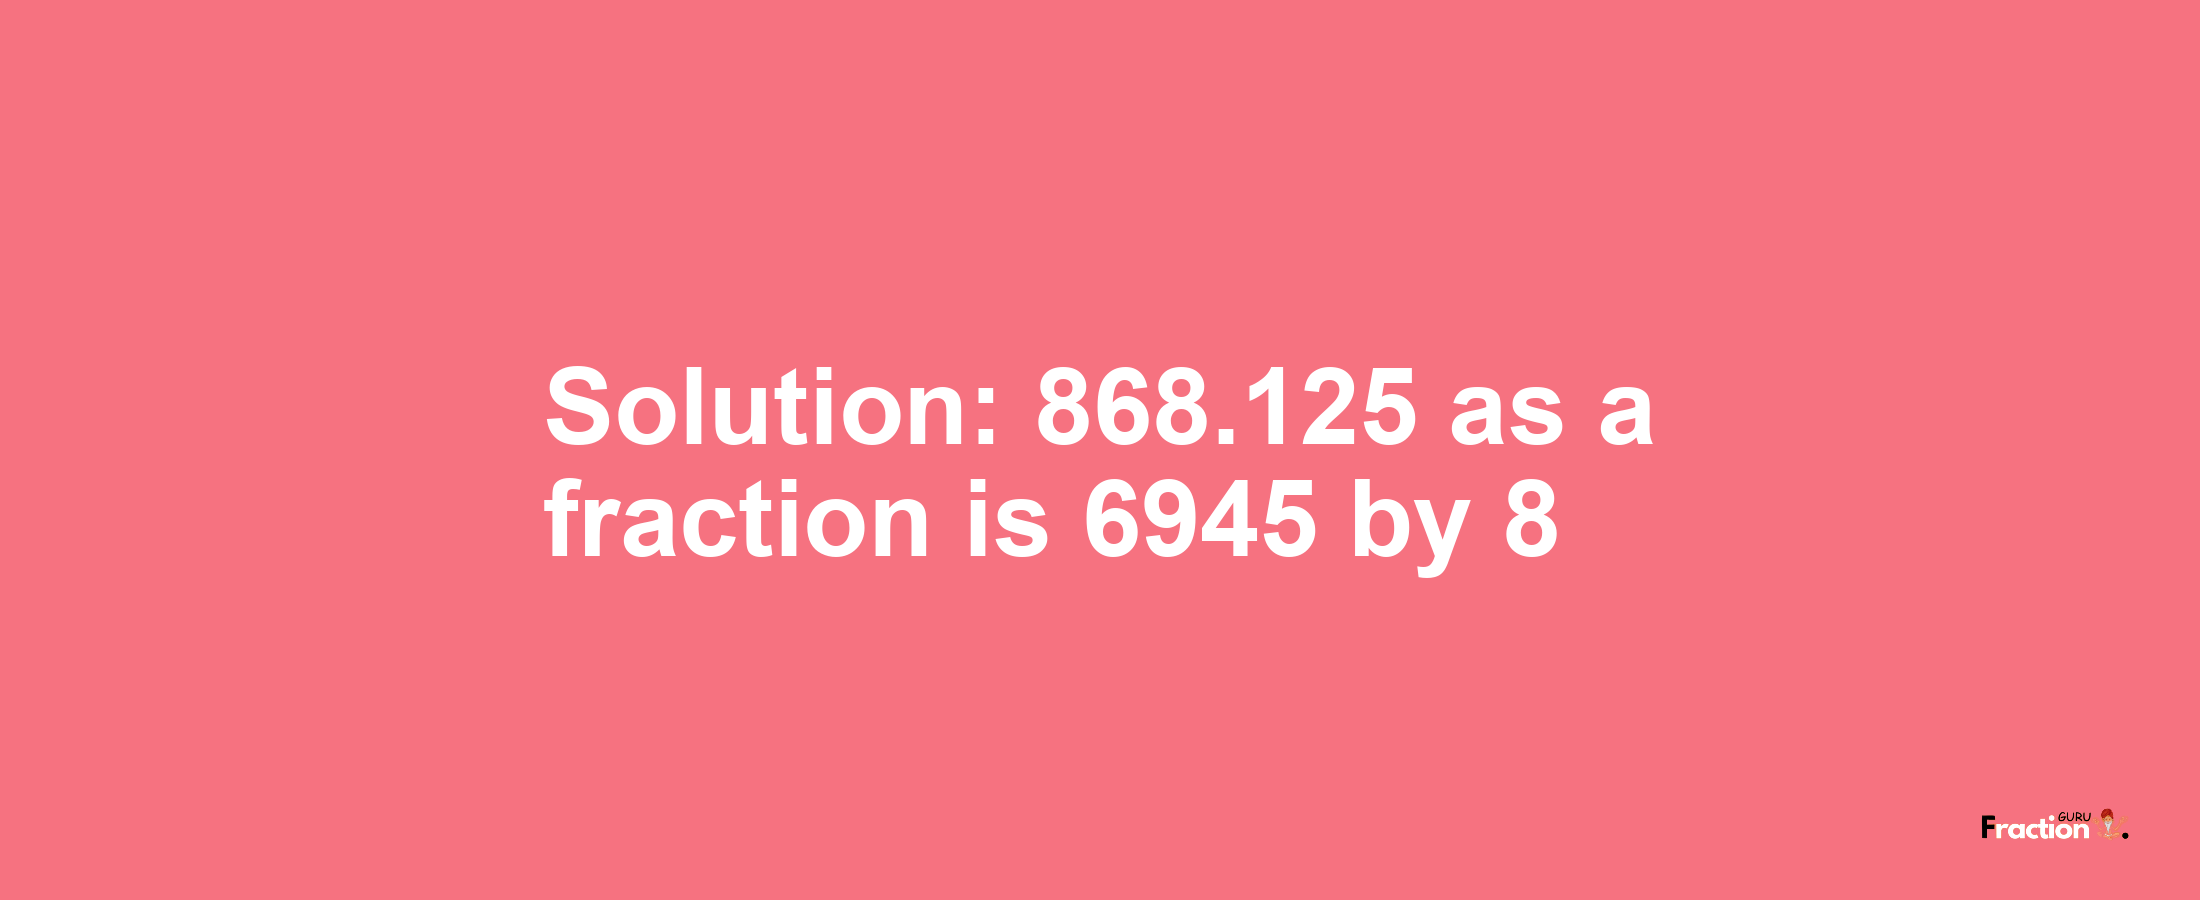 Solution:868.125 as a fraction is 6945/8